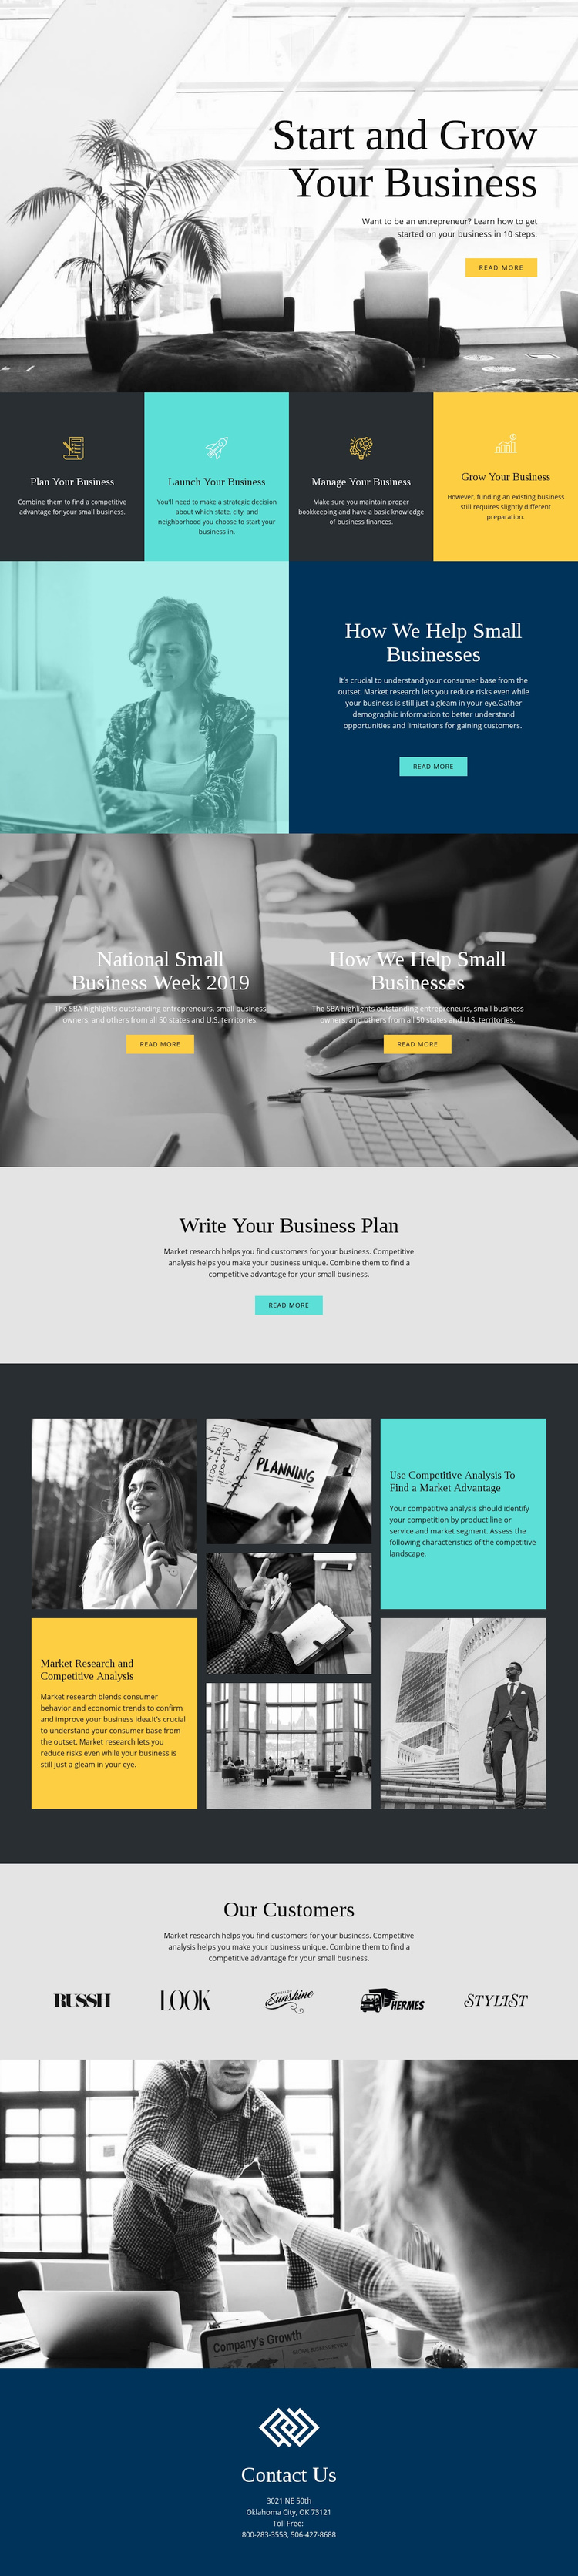 Start and grow your business Wix Template Alternative